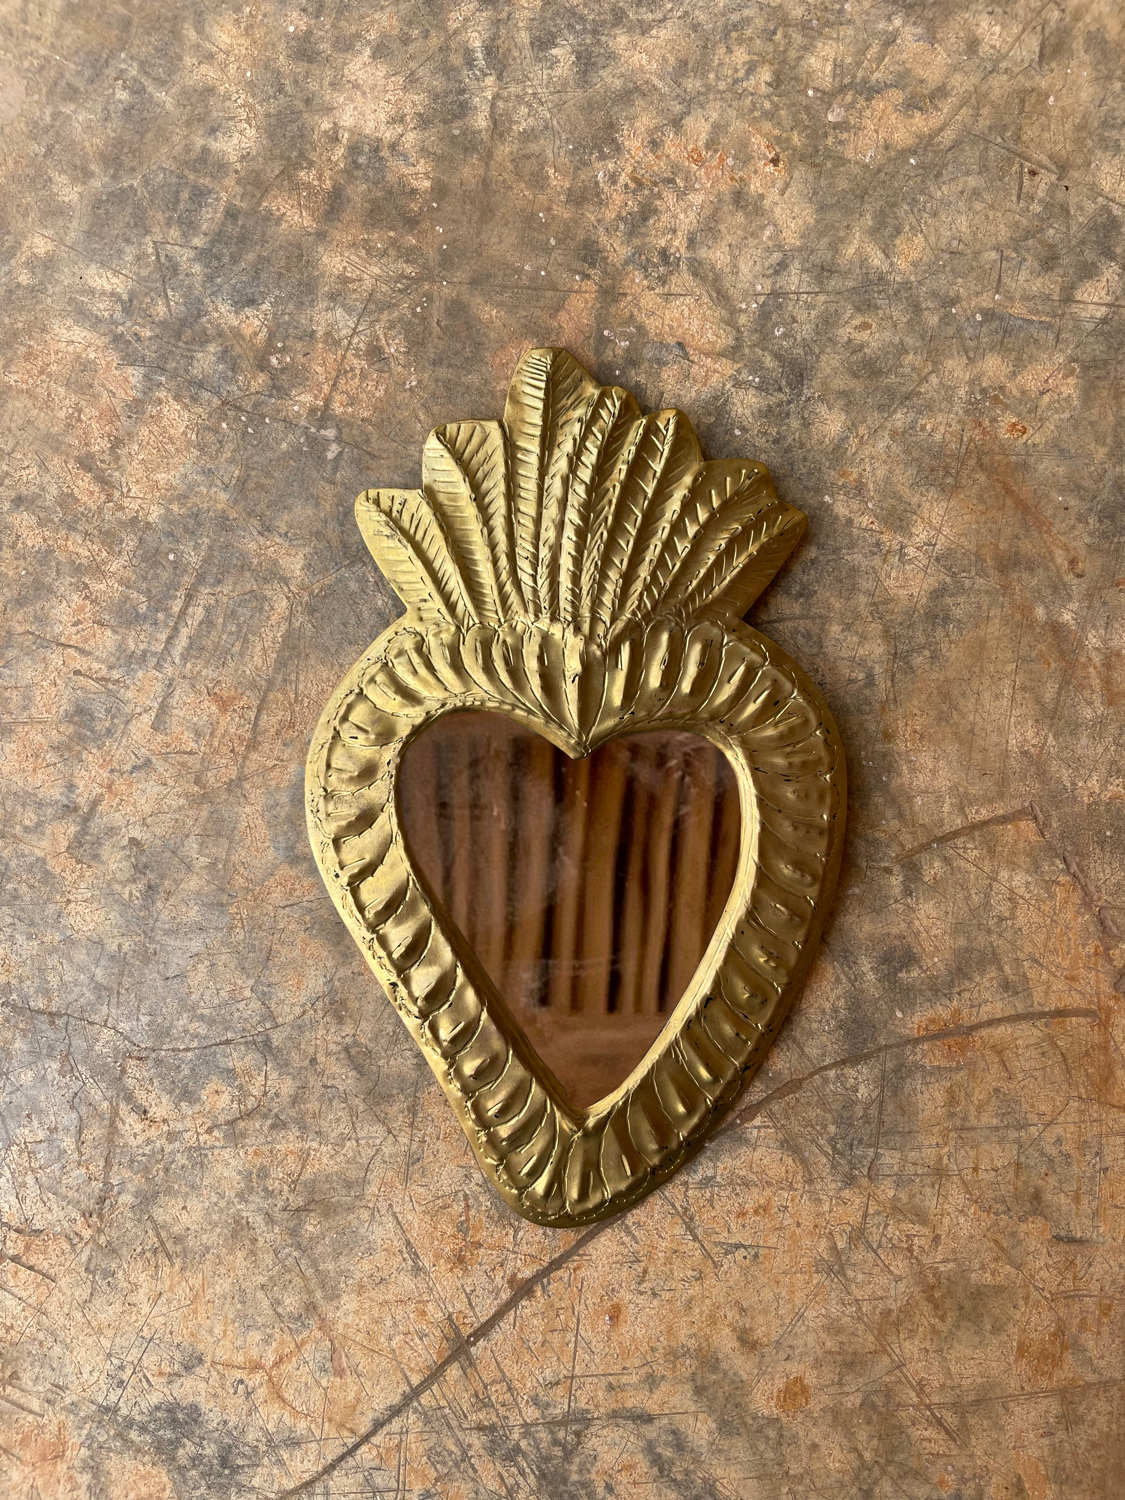 Moroccan Brass Wall Decor Sprouted Heart Mirror Wall Ornament Decor Une Vie Nomade Brand_Une Vie Nomade Home_Decor New Arrivals img_1857-Sacred-Heart-Sacre-Couer-Moroccan-Brass-Wall-Ornament-Metal-Mirror